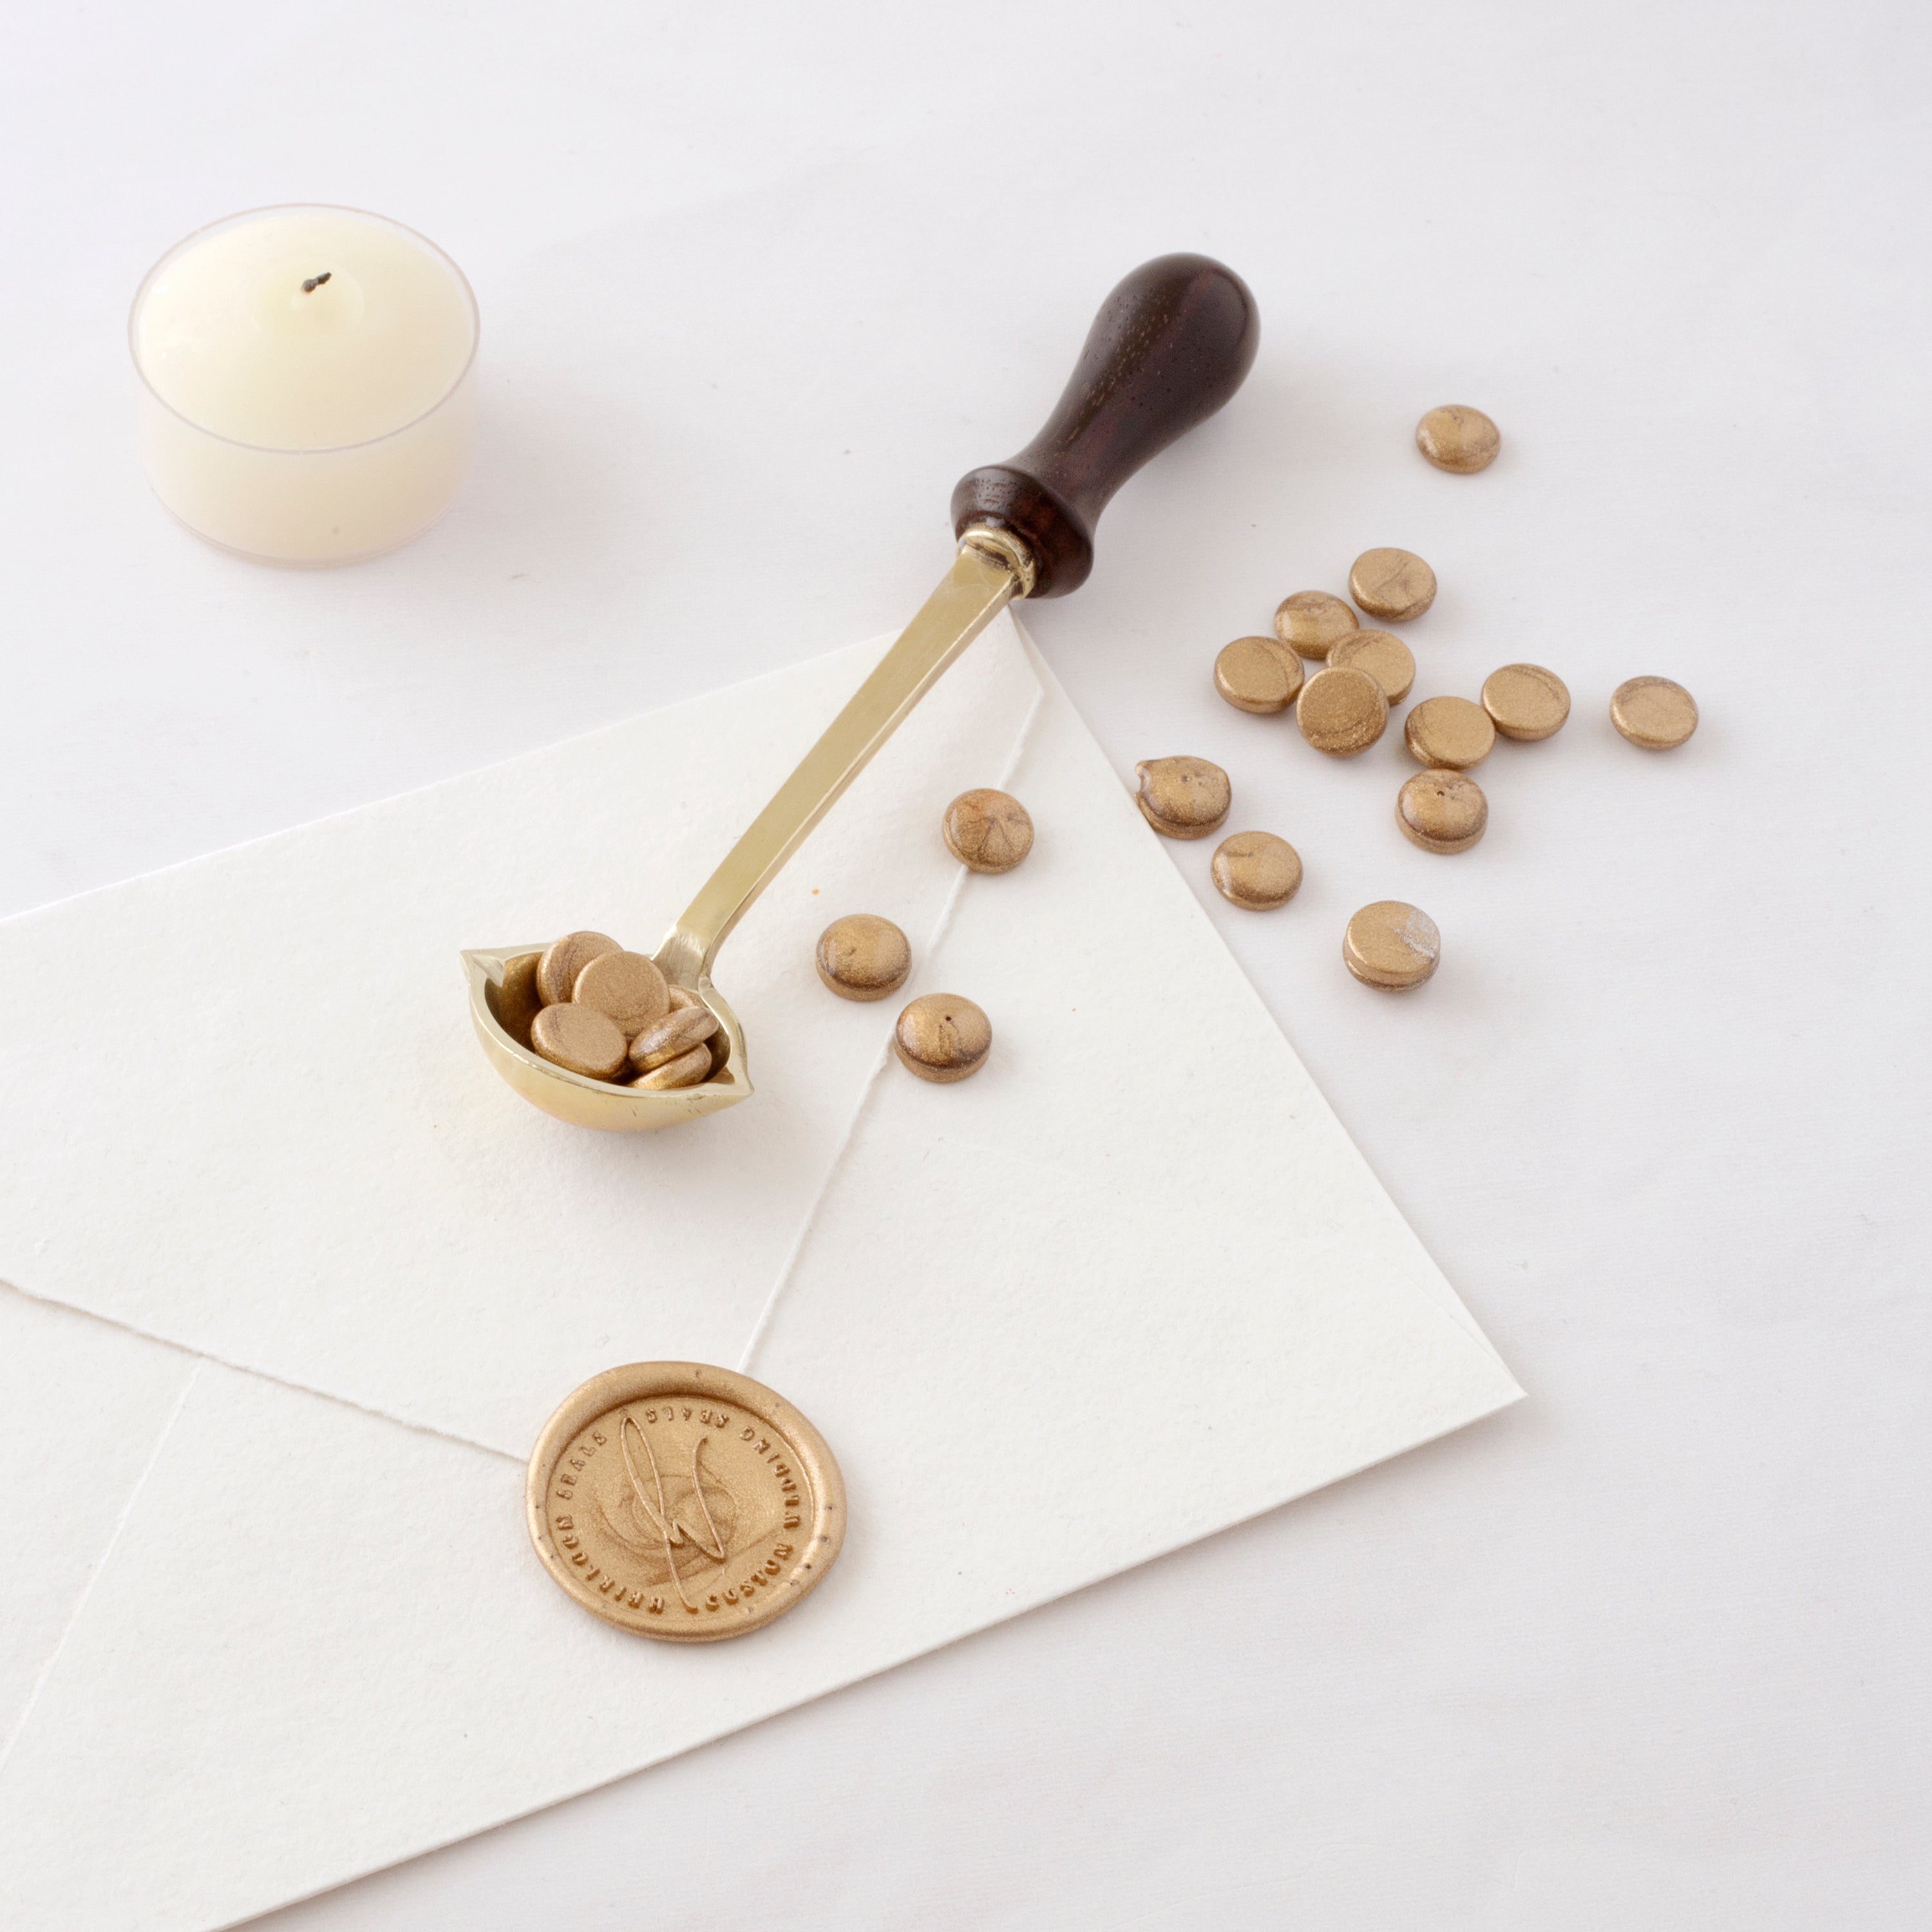 Sealing Wax and Wax Seal Stamps